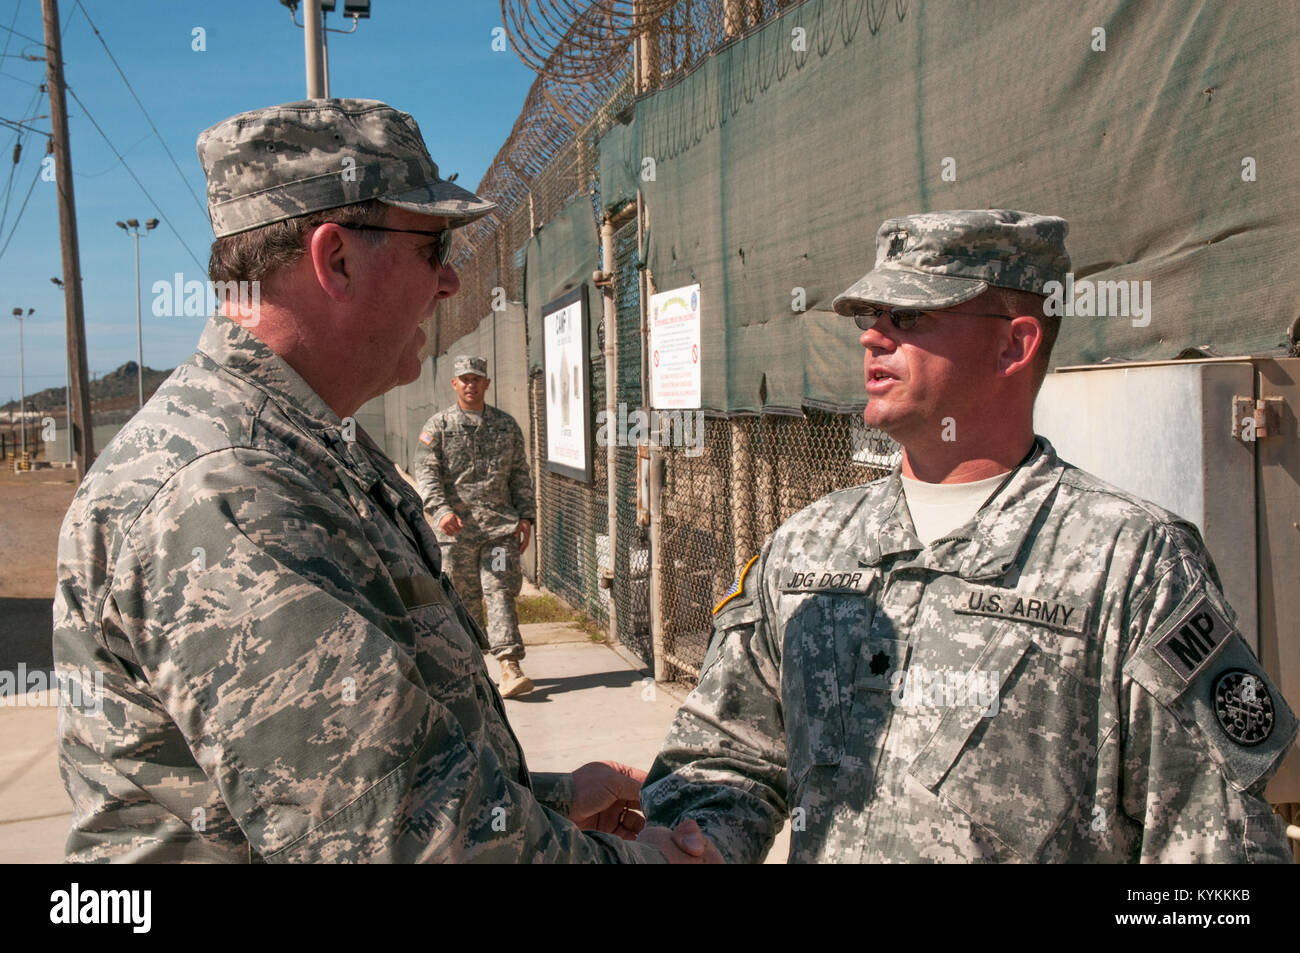 Air Force Maj. Gen. Edward Tonini, adjutant general for the state of Kentucky, greets Army Lt. Col. Michael Shoen, deputy commander of the Joint Detention Group, outside the sally port of Camp VI at U.S. Naval Station Guantanamo Bay, Cuba Dec. 3, 2013. Tonini came to the island to visit with Kentucky Guardsmen deployed to GTMO in support of public affairs operations there. (Army National Guard photo by Sgt. David Bolton/133rd Mobile Public Affairs Detachment/Joint Task Force-GTMO Public Affairs) Stock Photo